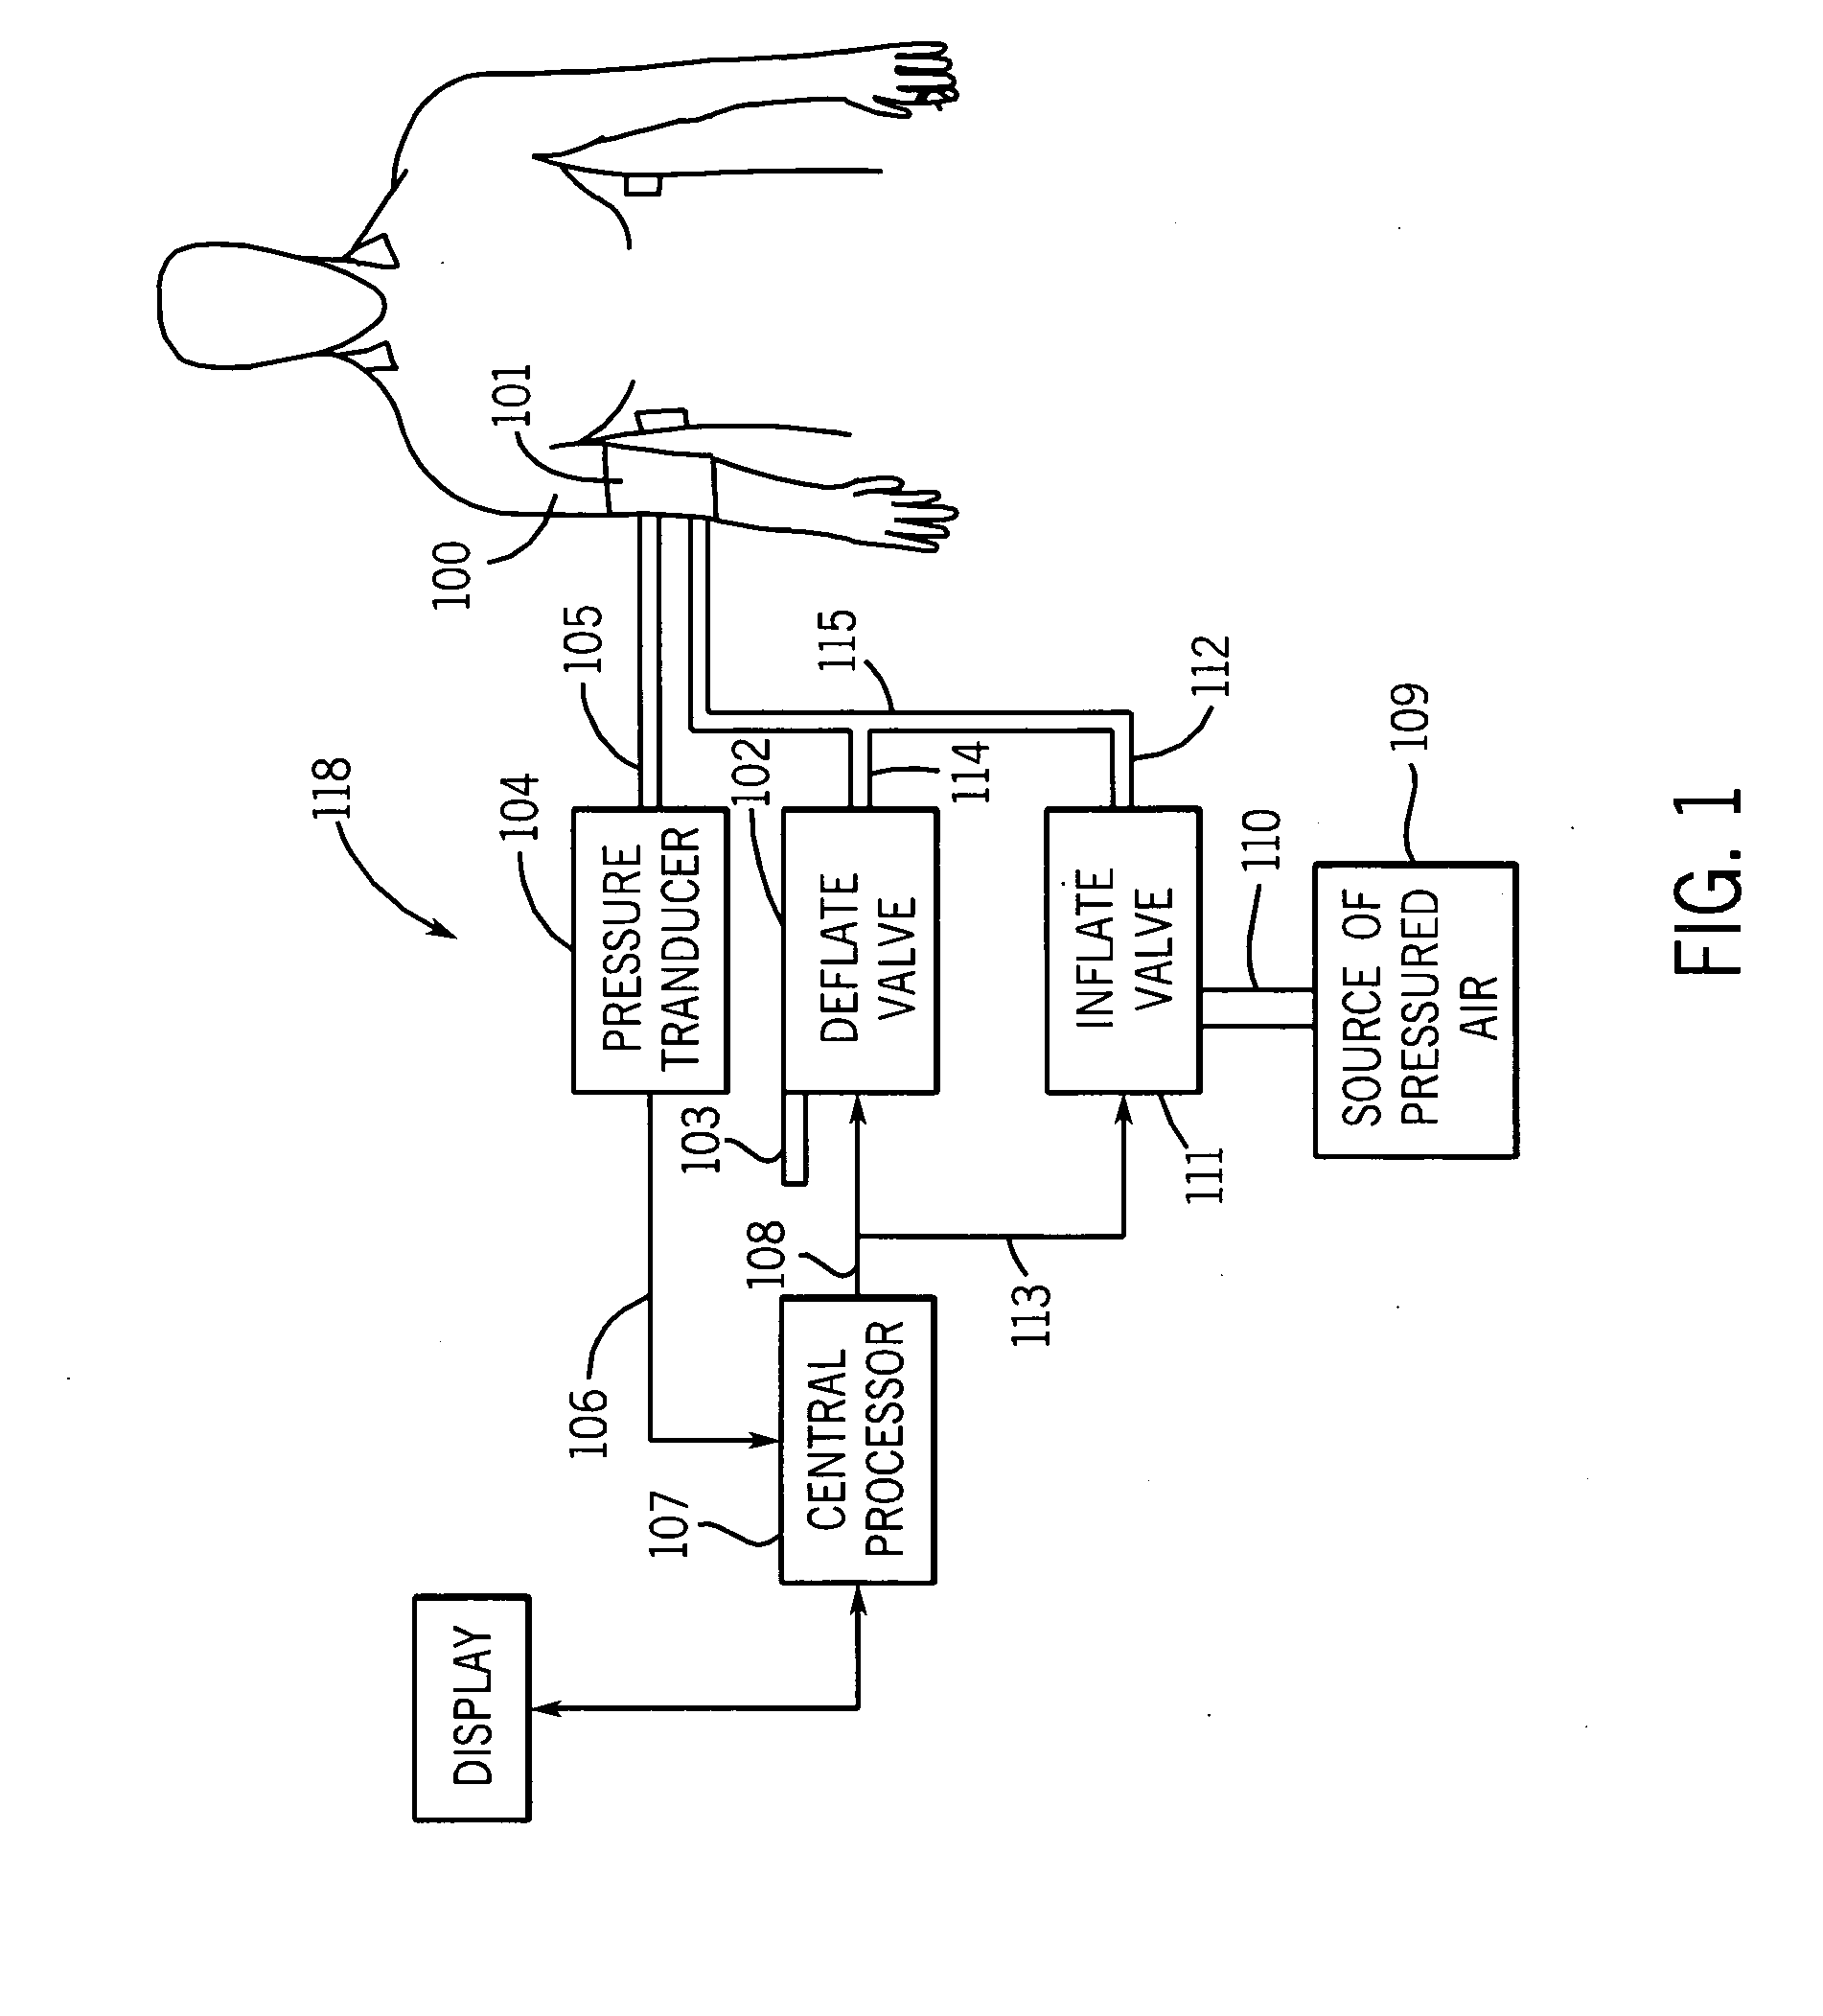 Computation of blood pressure using different signal processing channels